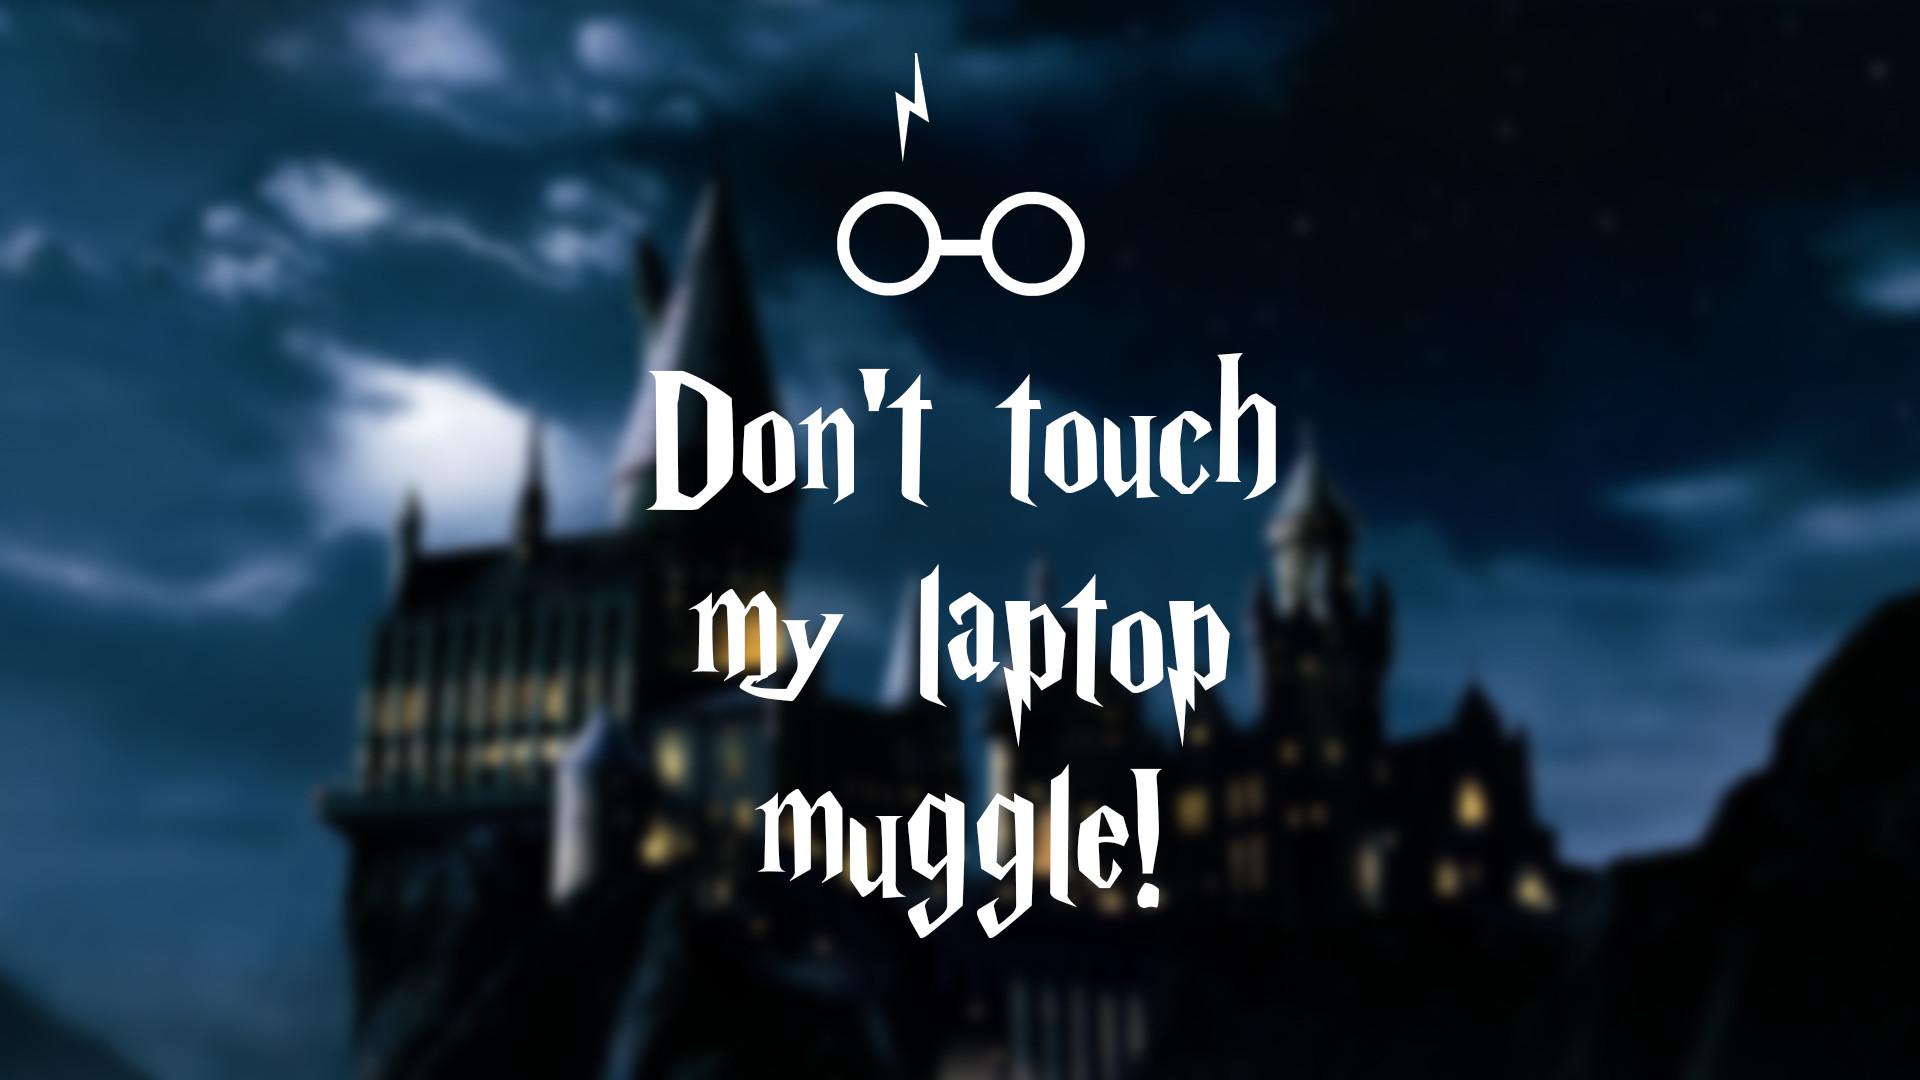 Don T Touch My Phone Muggle Wallpapers Wallpaper Cave Looking for the best dont touch my computer wallpaper? don t touch my phone muggle wallpapers